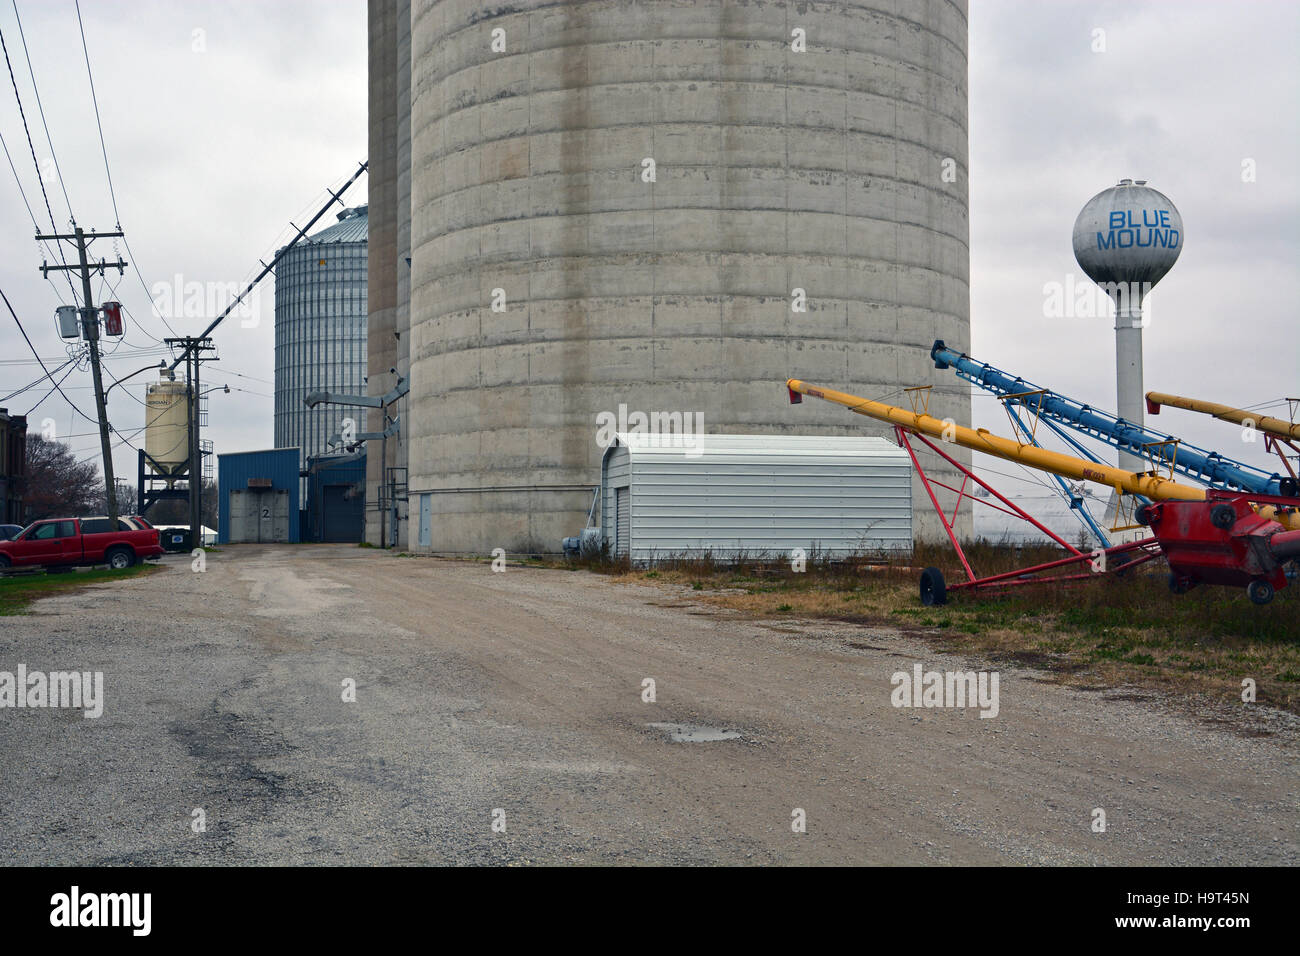 A corn and grain silo located off Route 48 under cold gray November skies in the Central Illinois town of Blue Mound. Stock Photo